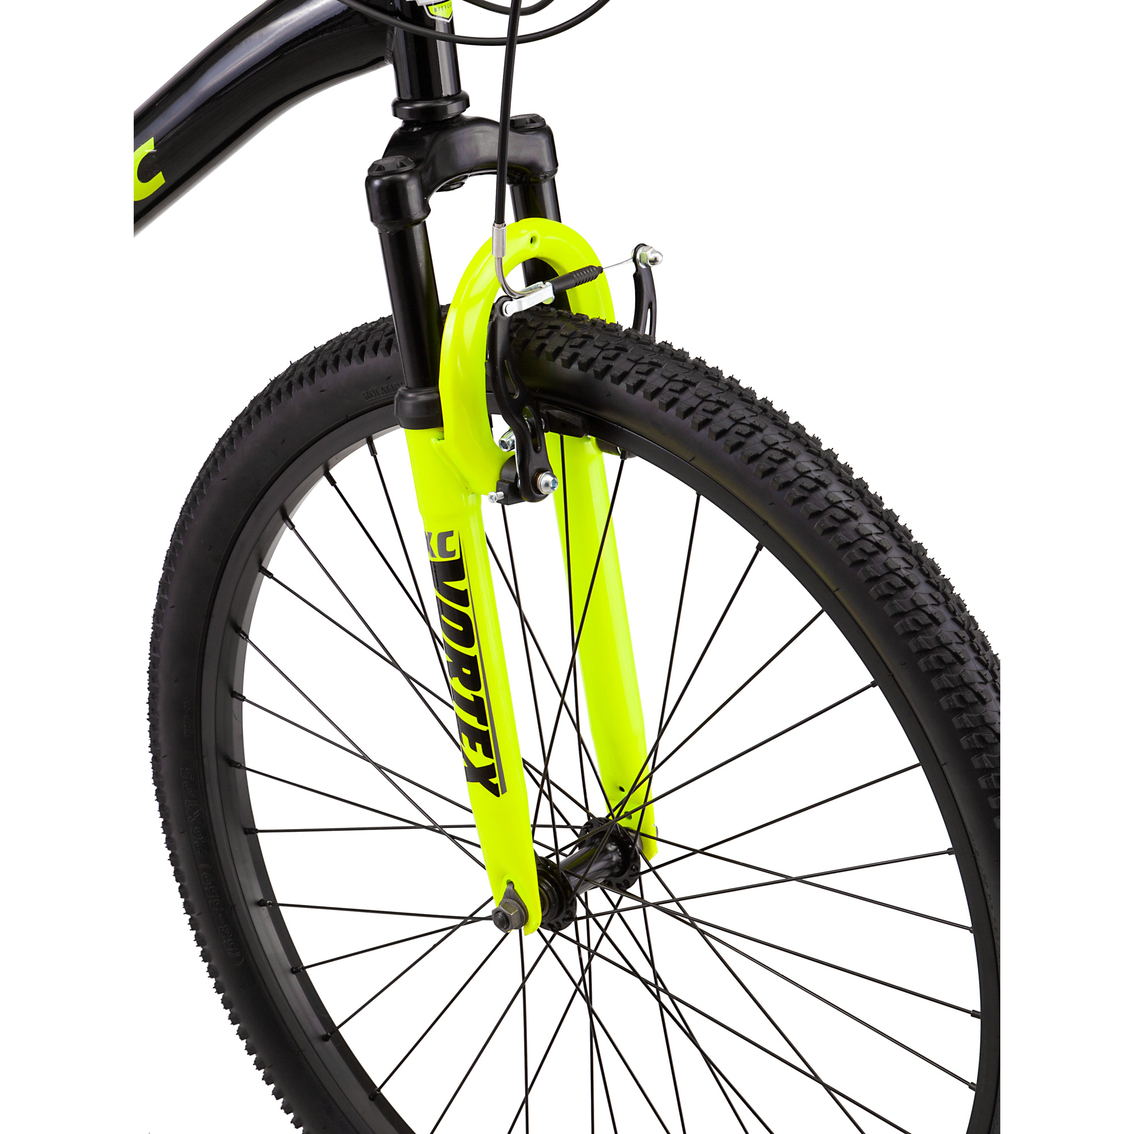 Pacific Cavern 26 in. Men's Front Suspension Mountain Bike - Image 4 of 5